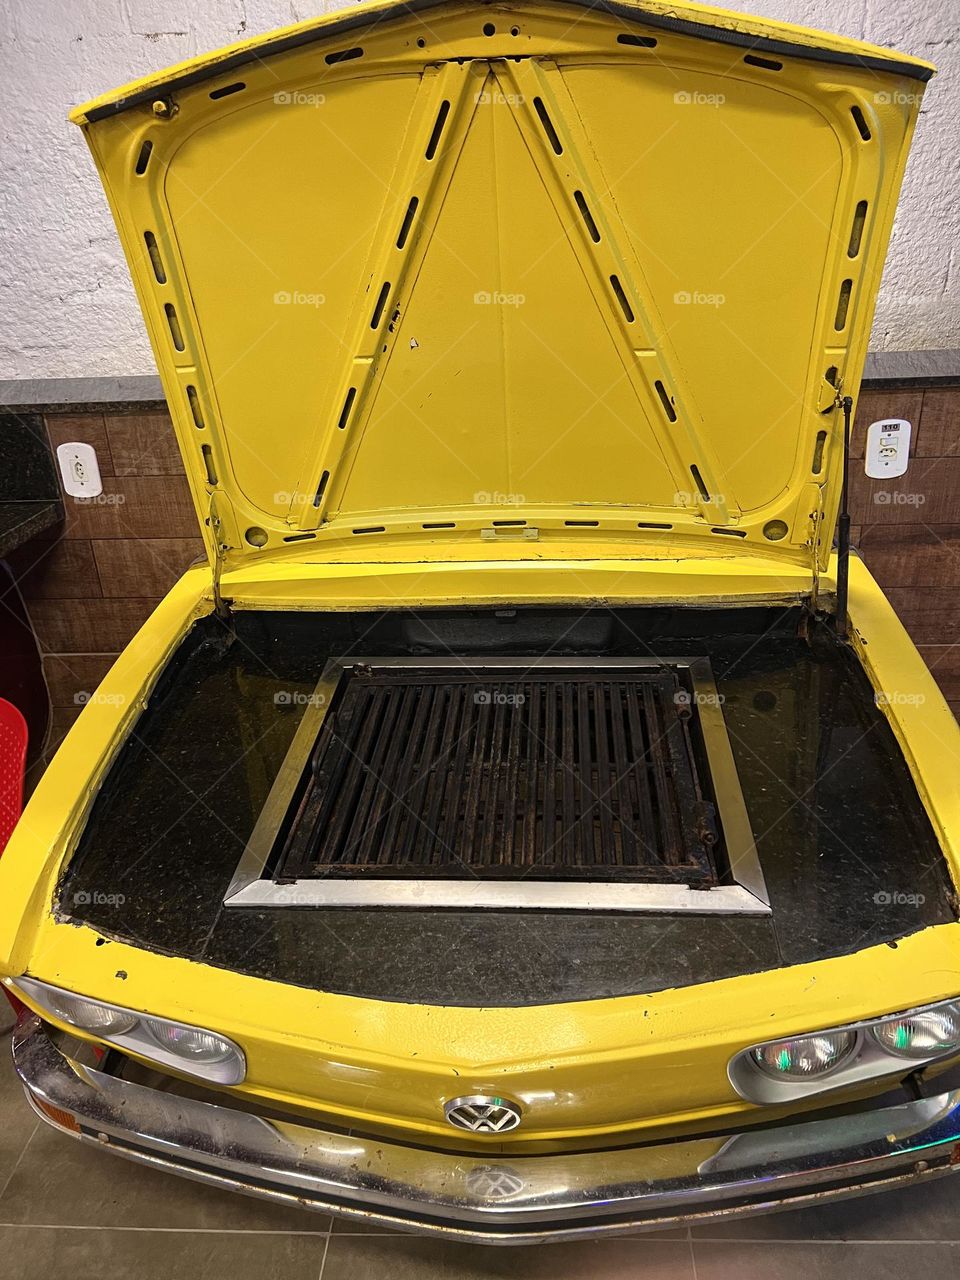 Under the hood: grill